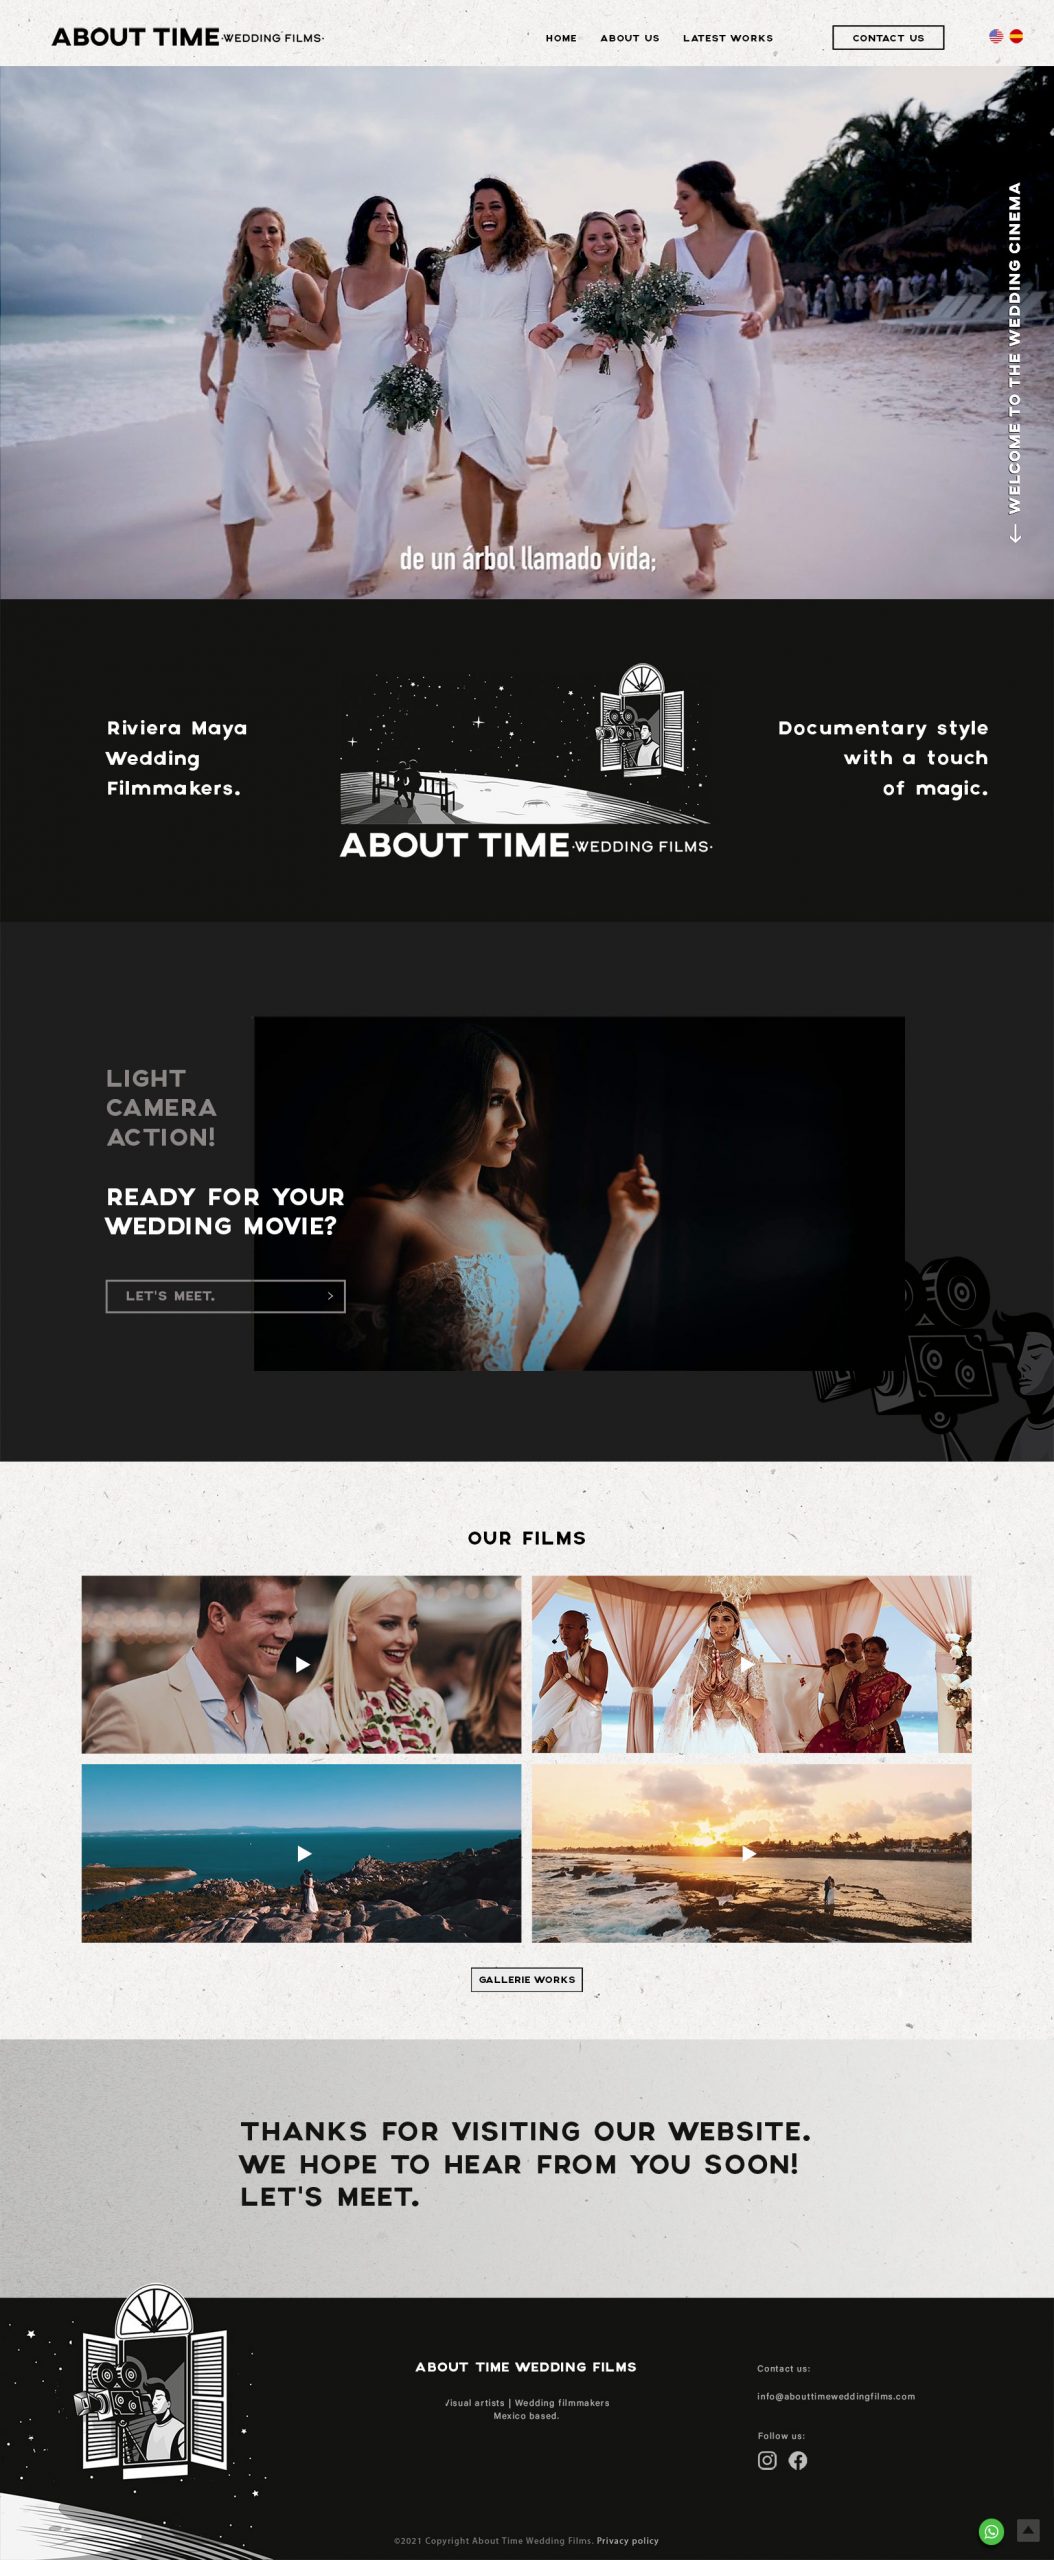 Website About Time Wedding Films. Visual artists wedding filmmakers. Riviera Maya. Mexico